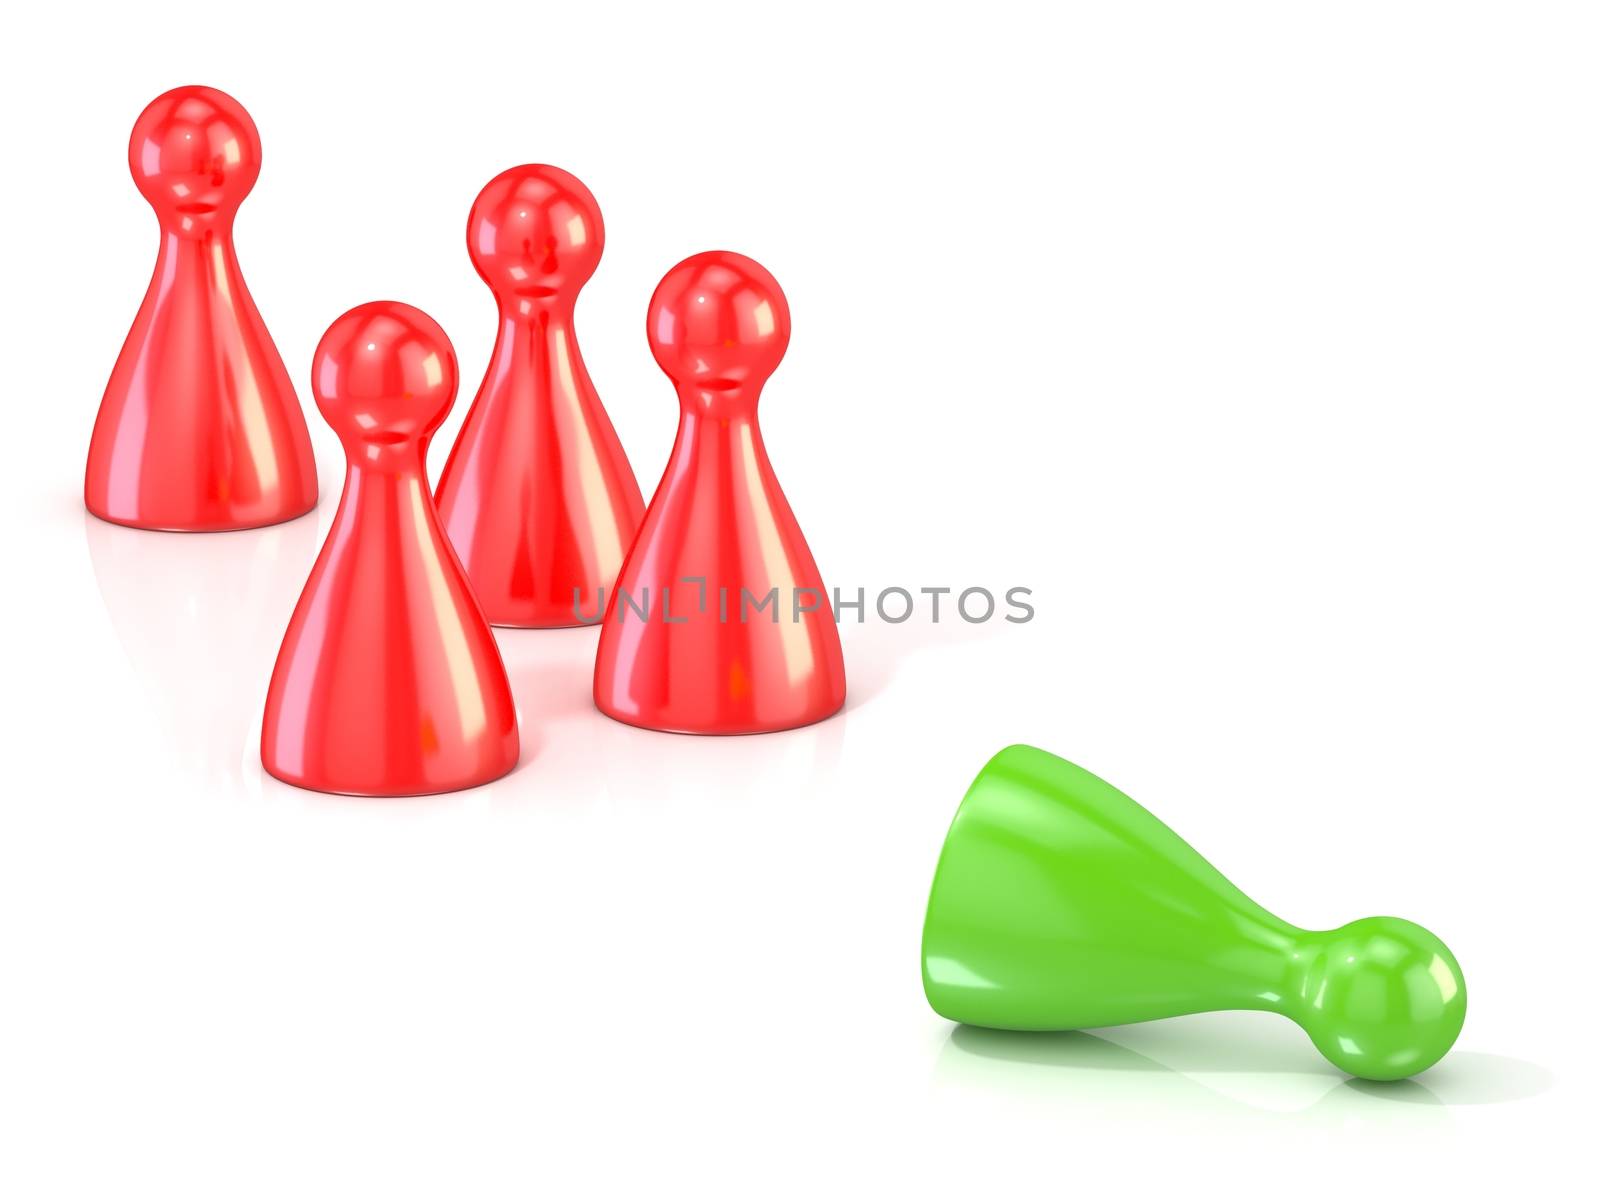 Red play figures standing and green one lying . Concept of rejec by djmilic